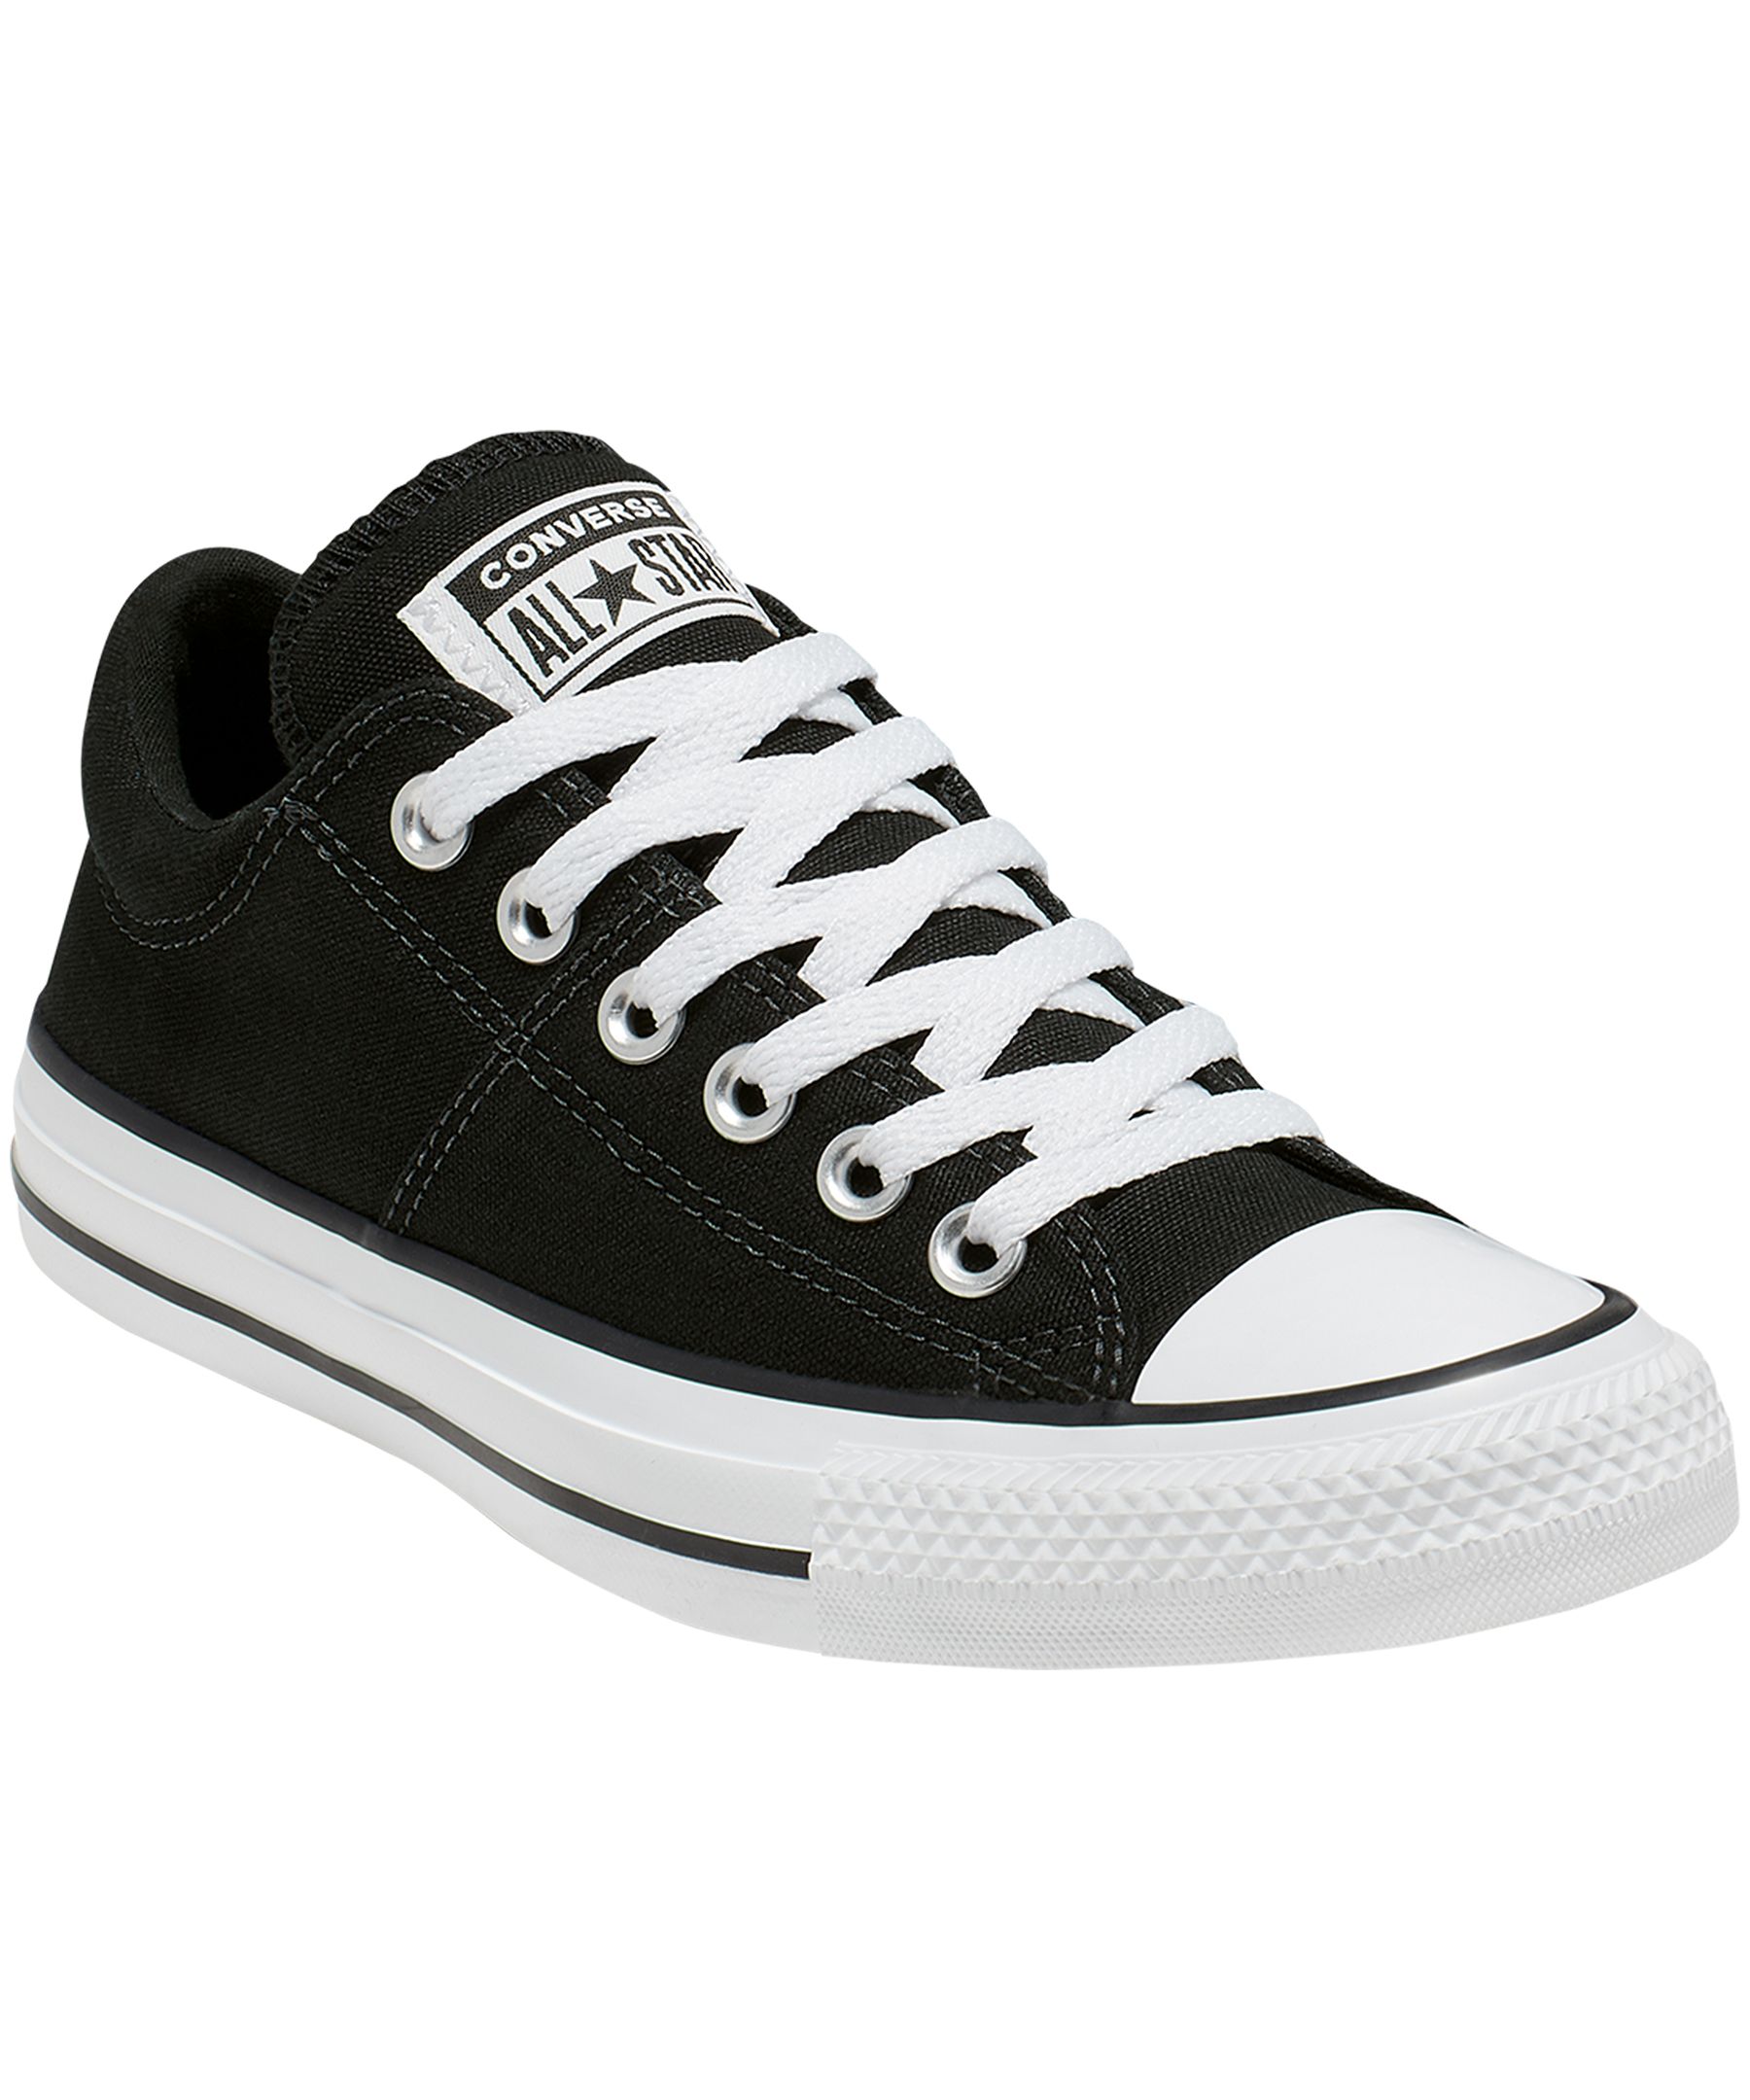 Converse Women's Chuck Taylor All Star Madison OX Shoes - Black | Marks